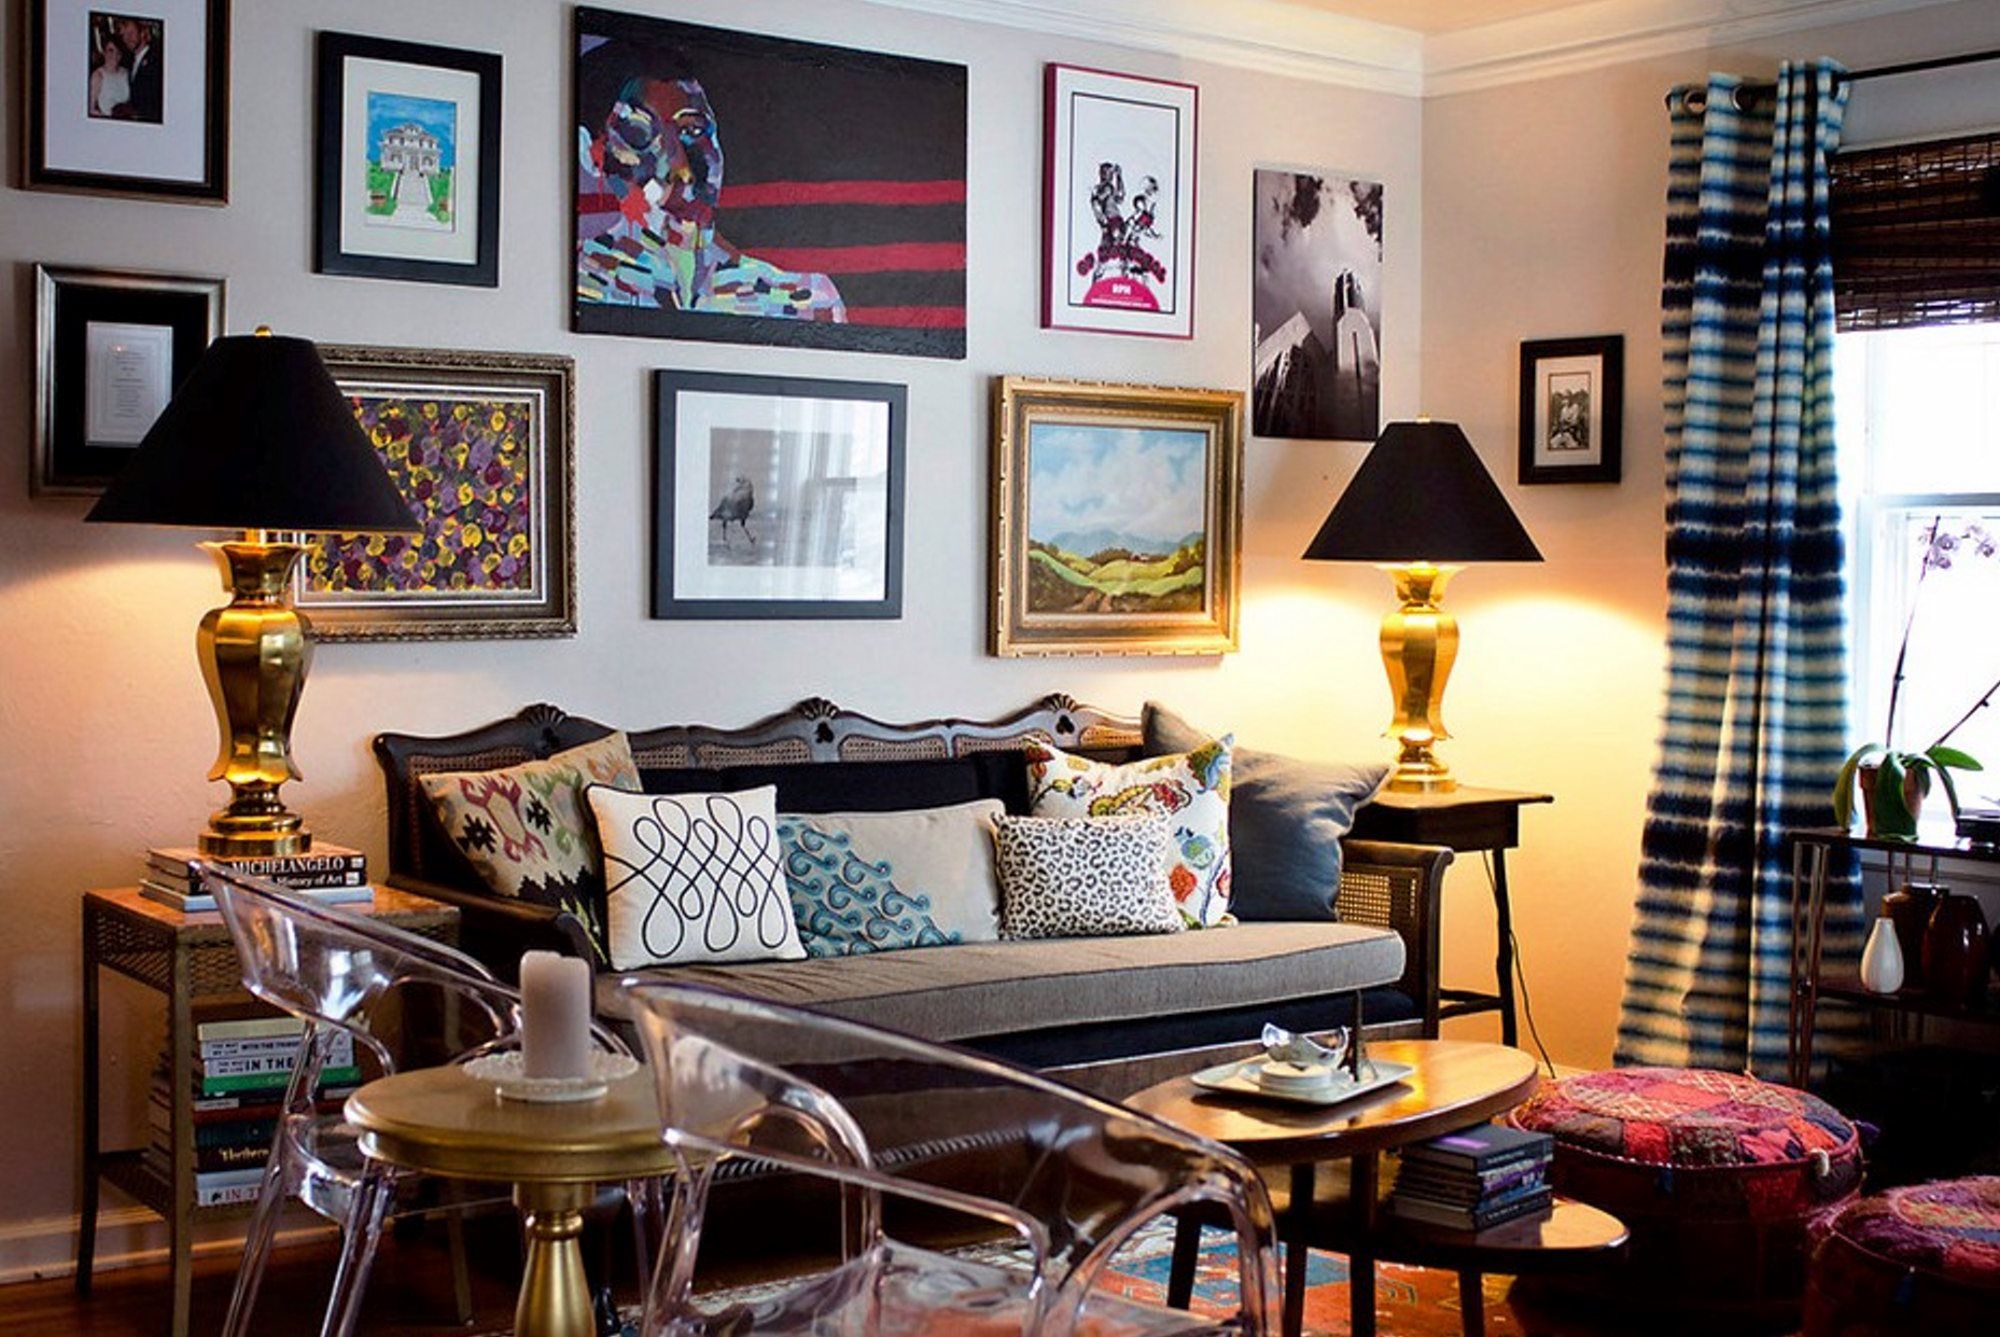 From Vintage To Modern: How To Blend Old And New Decor Seamlessly